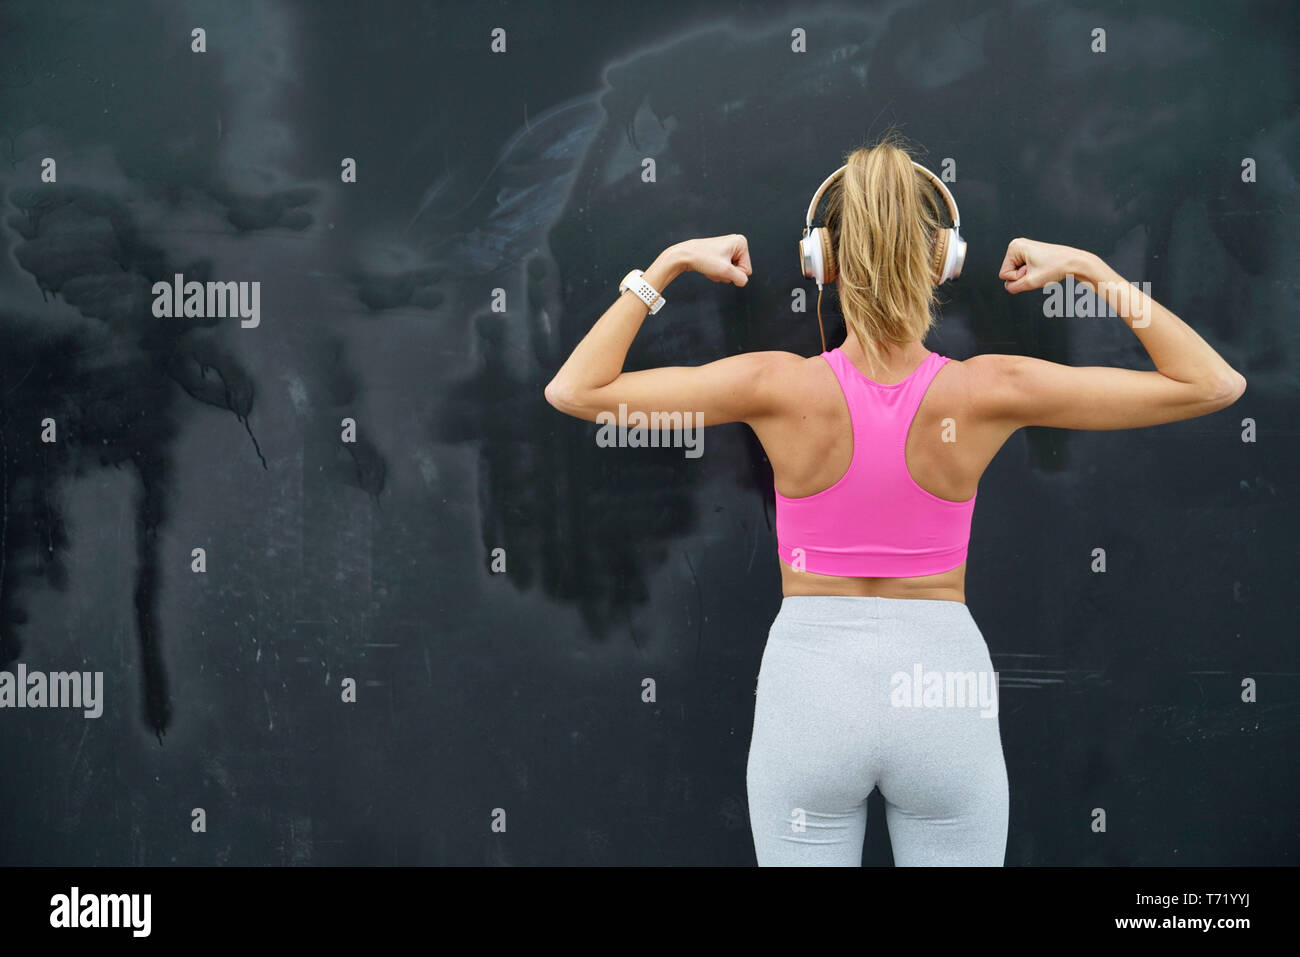 https://c8.alamy.com/comp/T71YYJ/back-of-strong-toned-woman-in-sportswear-and-headphones-on-black-background-T71YYJ.jpg